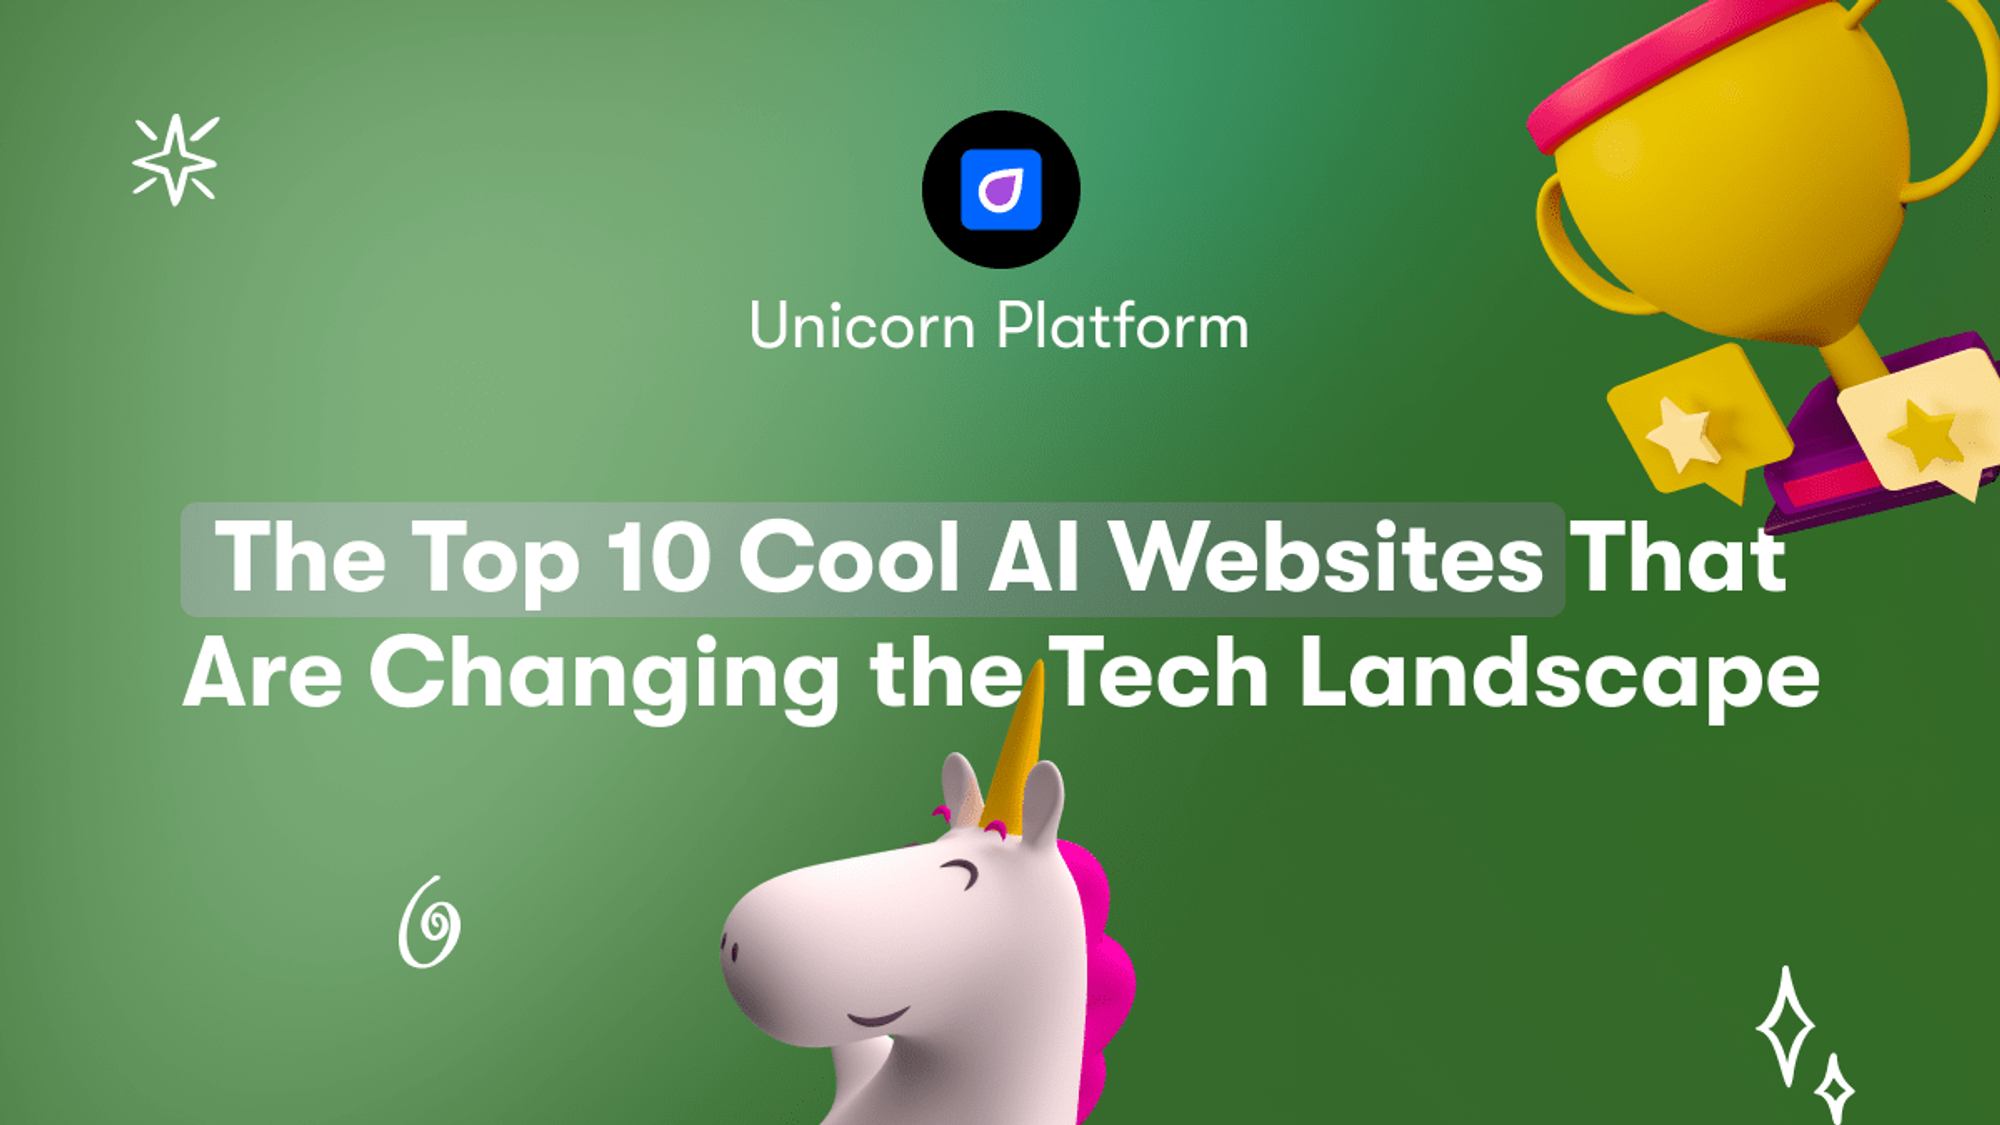 The Top 10 Cool AI Websites That Are Changing the Tech Landscape